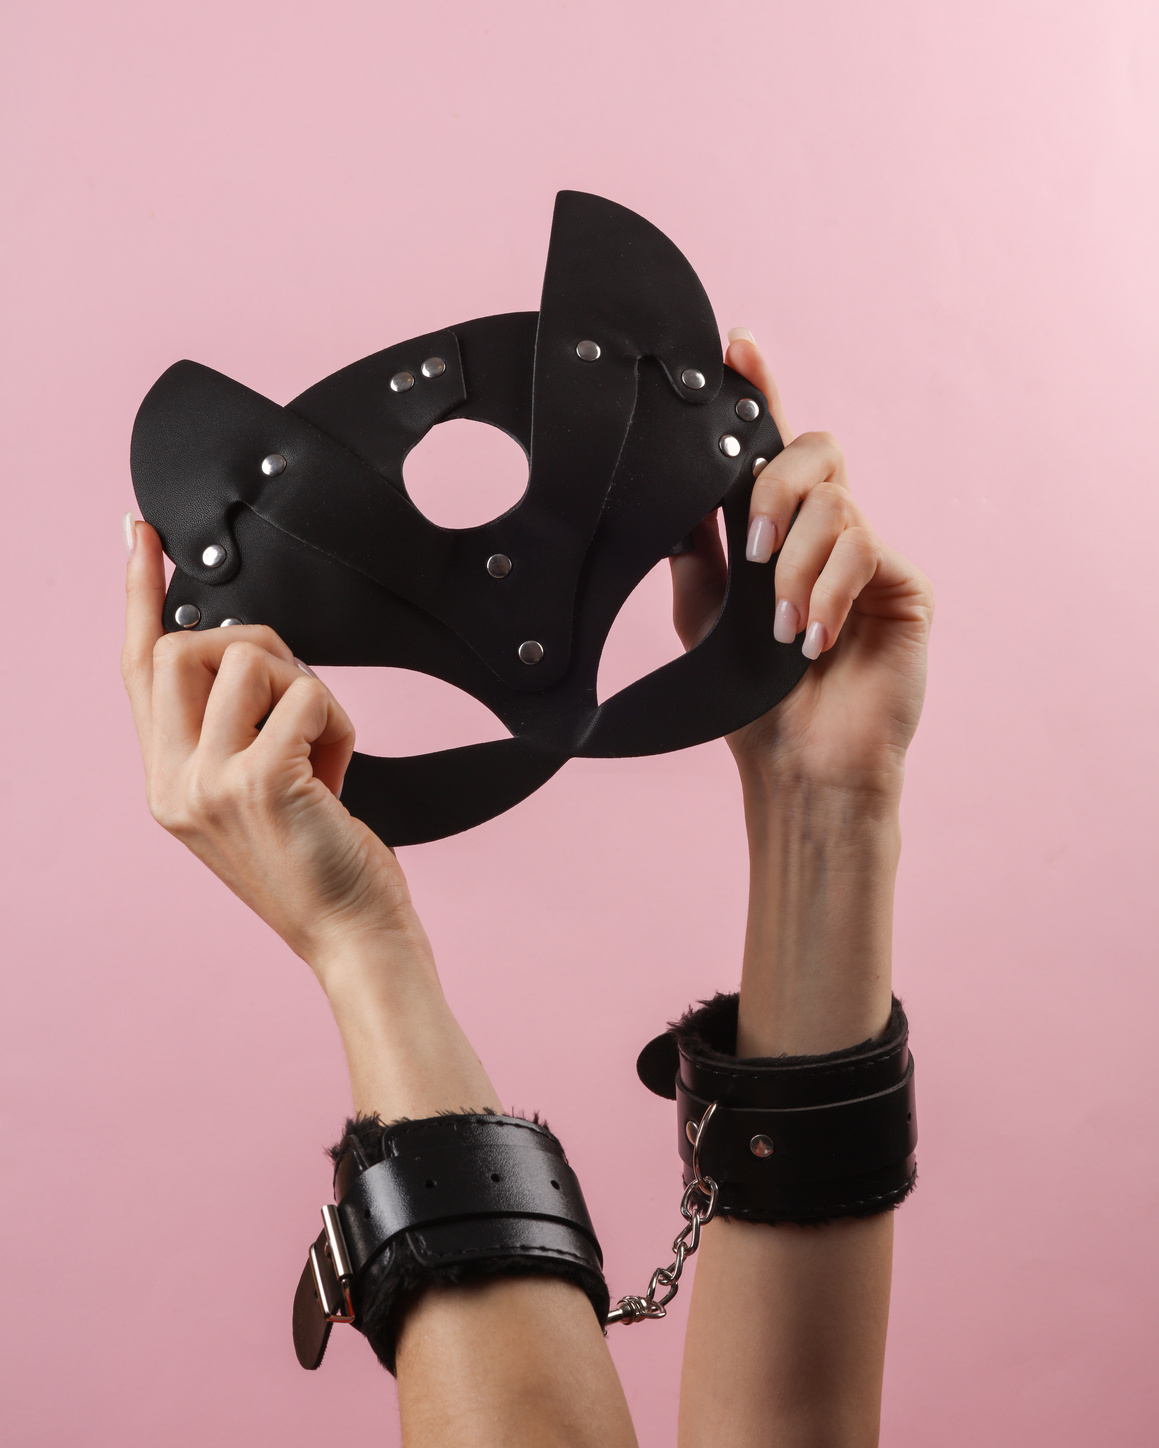 Women's hands in leather handcuffs holding black cat mask on pink background. BDSM accessories, domination, sex games